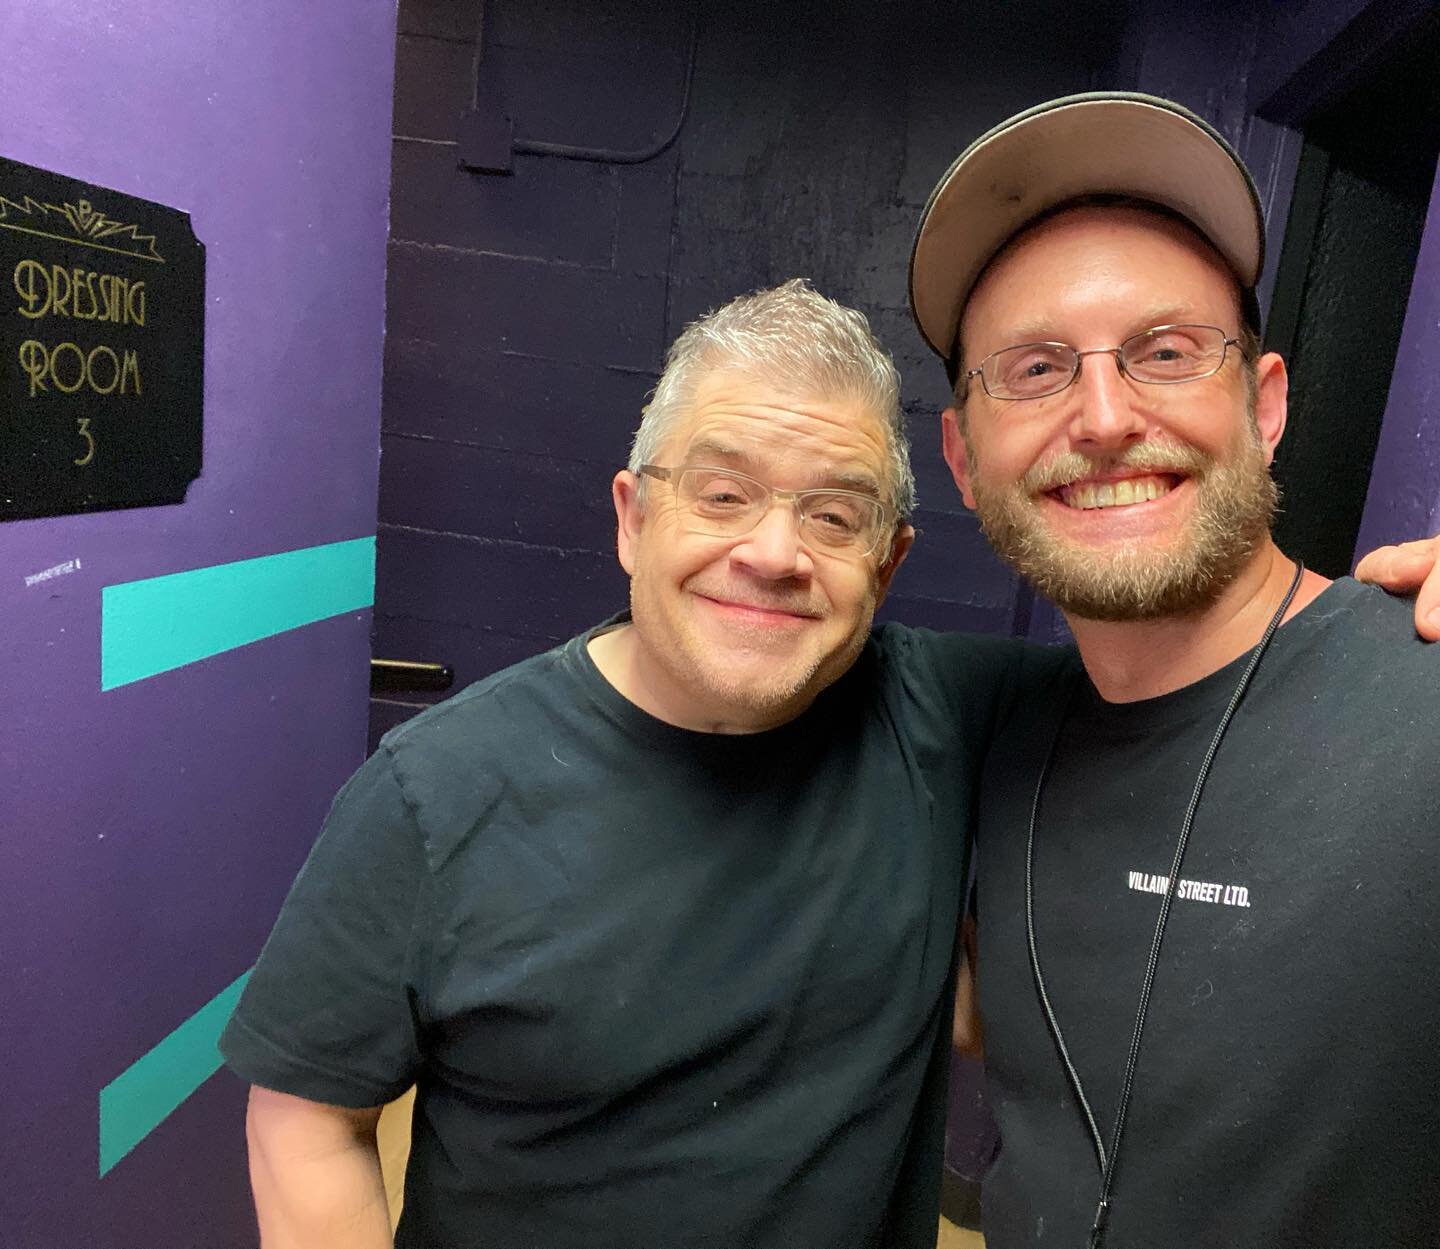 This is @snowmanfilms rocking our BASIC VILLAIN TEE while working with the legendary @pattonoswalt &bull; Get your custom black swag at Villainy Street apparel. Throw it up. Tag us, and we will feature you. &lt;link in bio&gt; // #PattonOswalt #Snowm